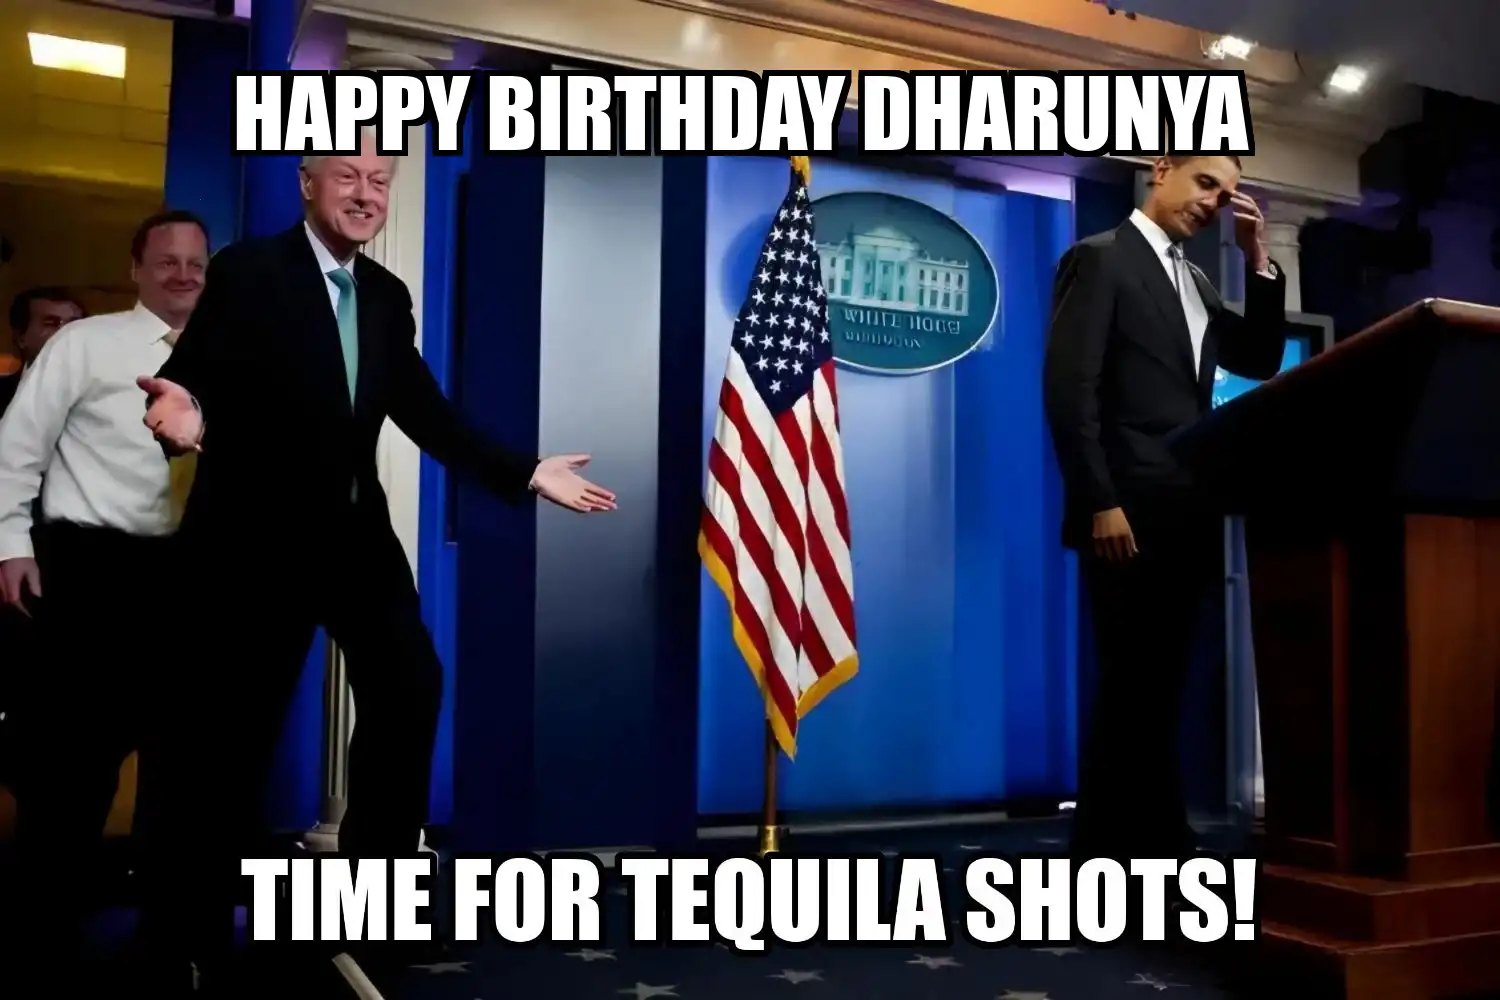 Happy Birthday Dharunya Time For Tequila Shots Memes